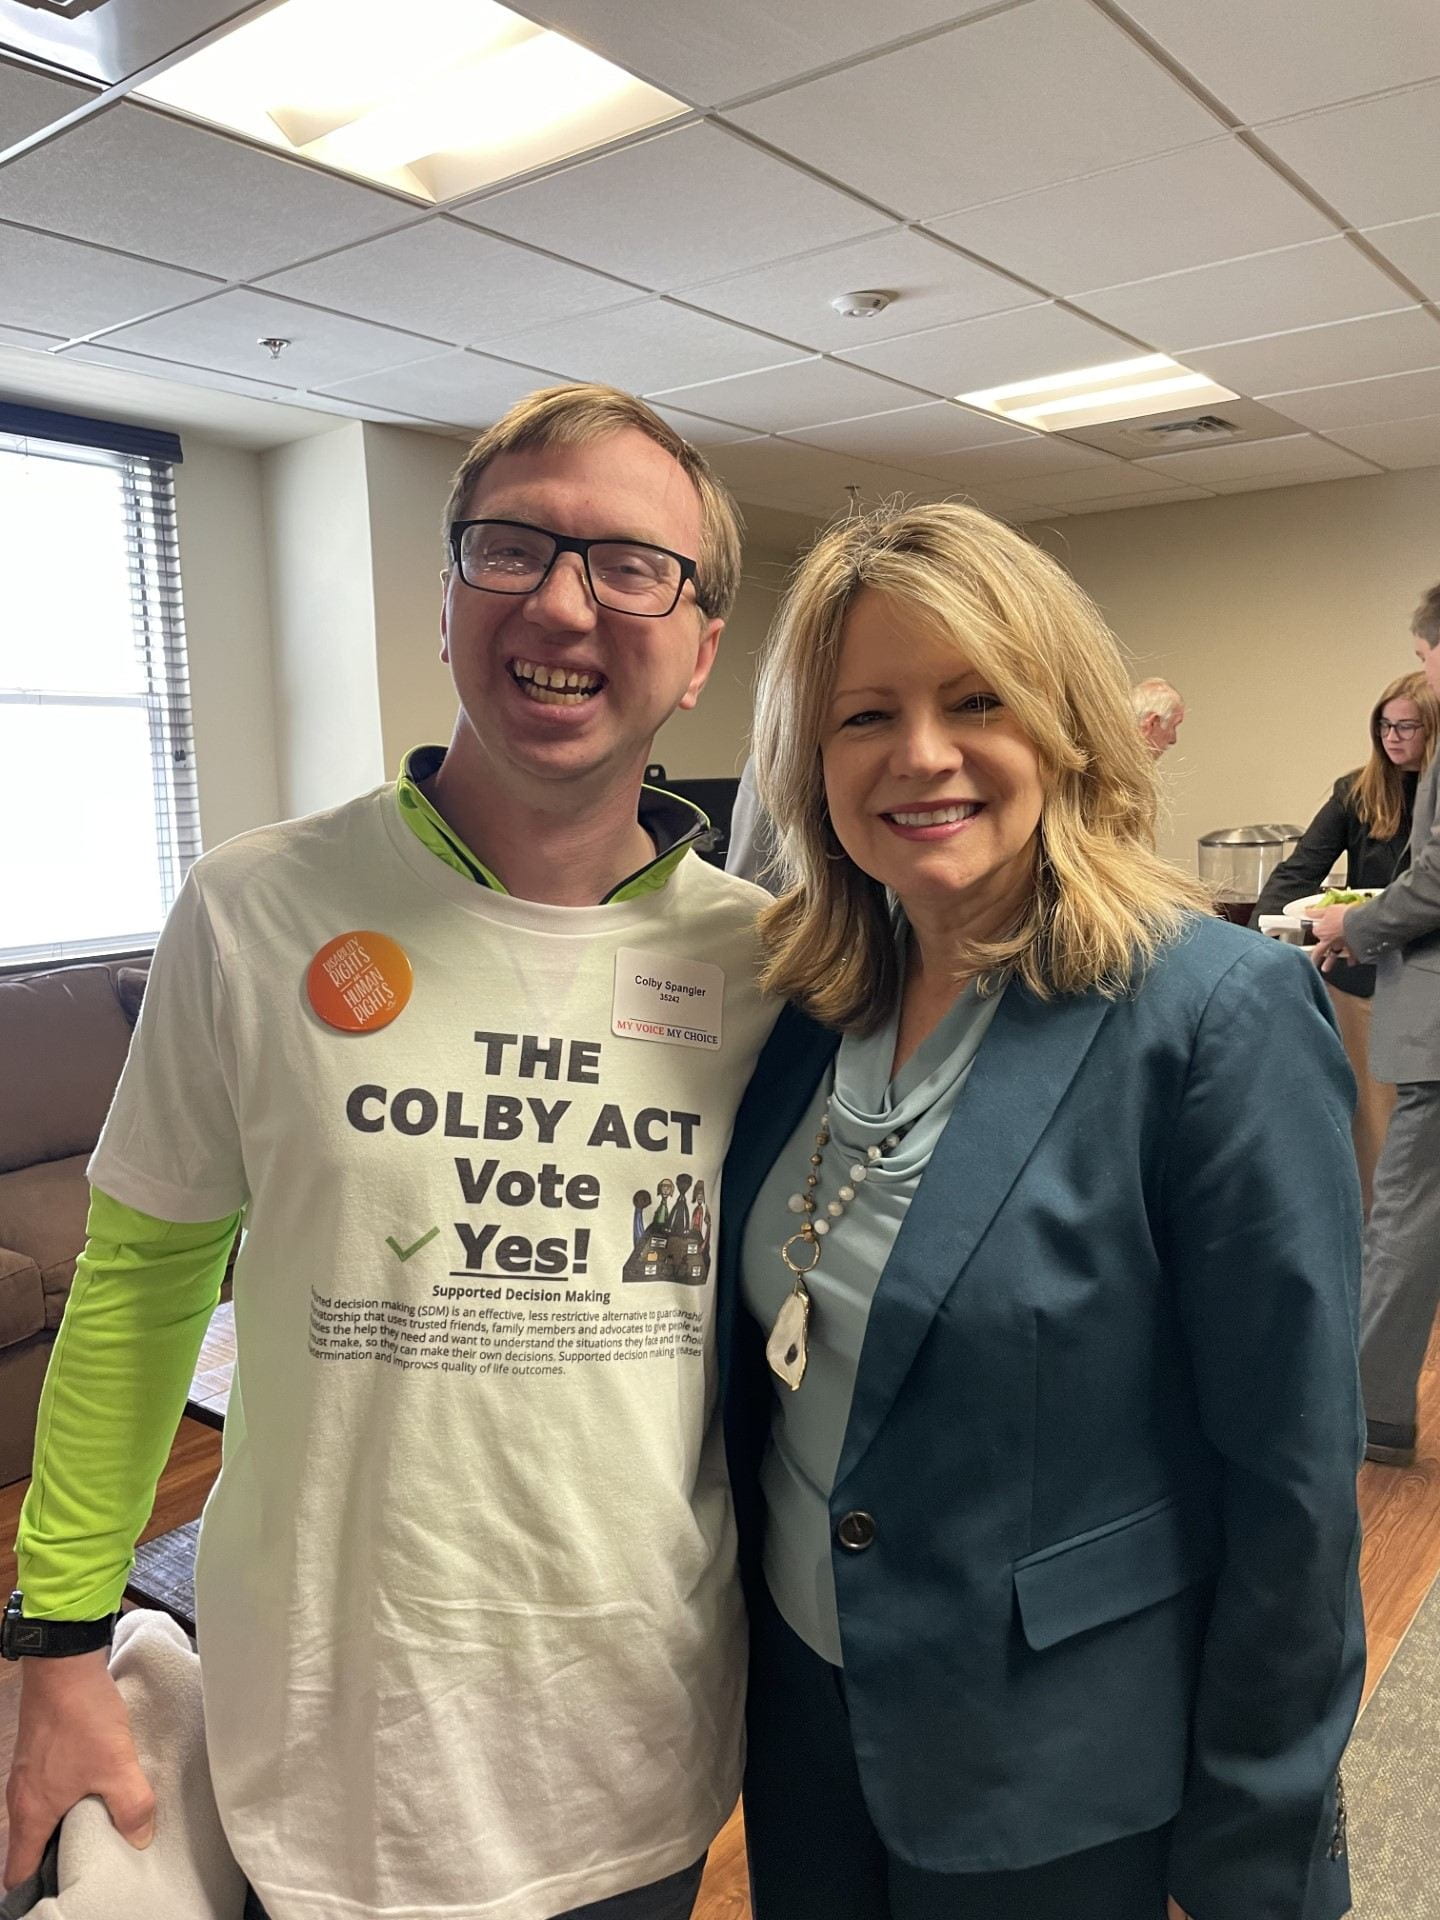 Colby wearing a shirt that says "The Colby Act, vote yes!" next to Representative Cynthia Almond of Tuscaloosa.